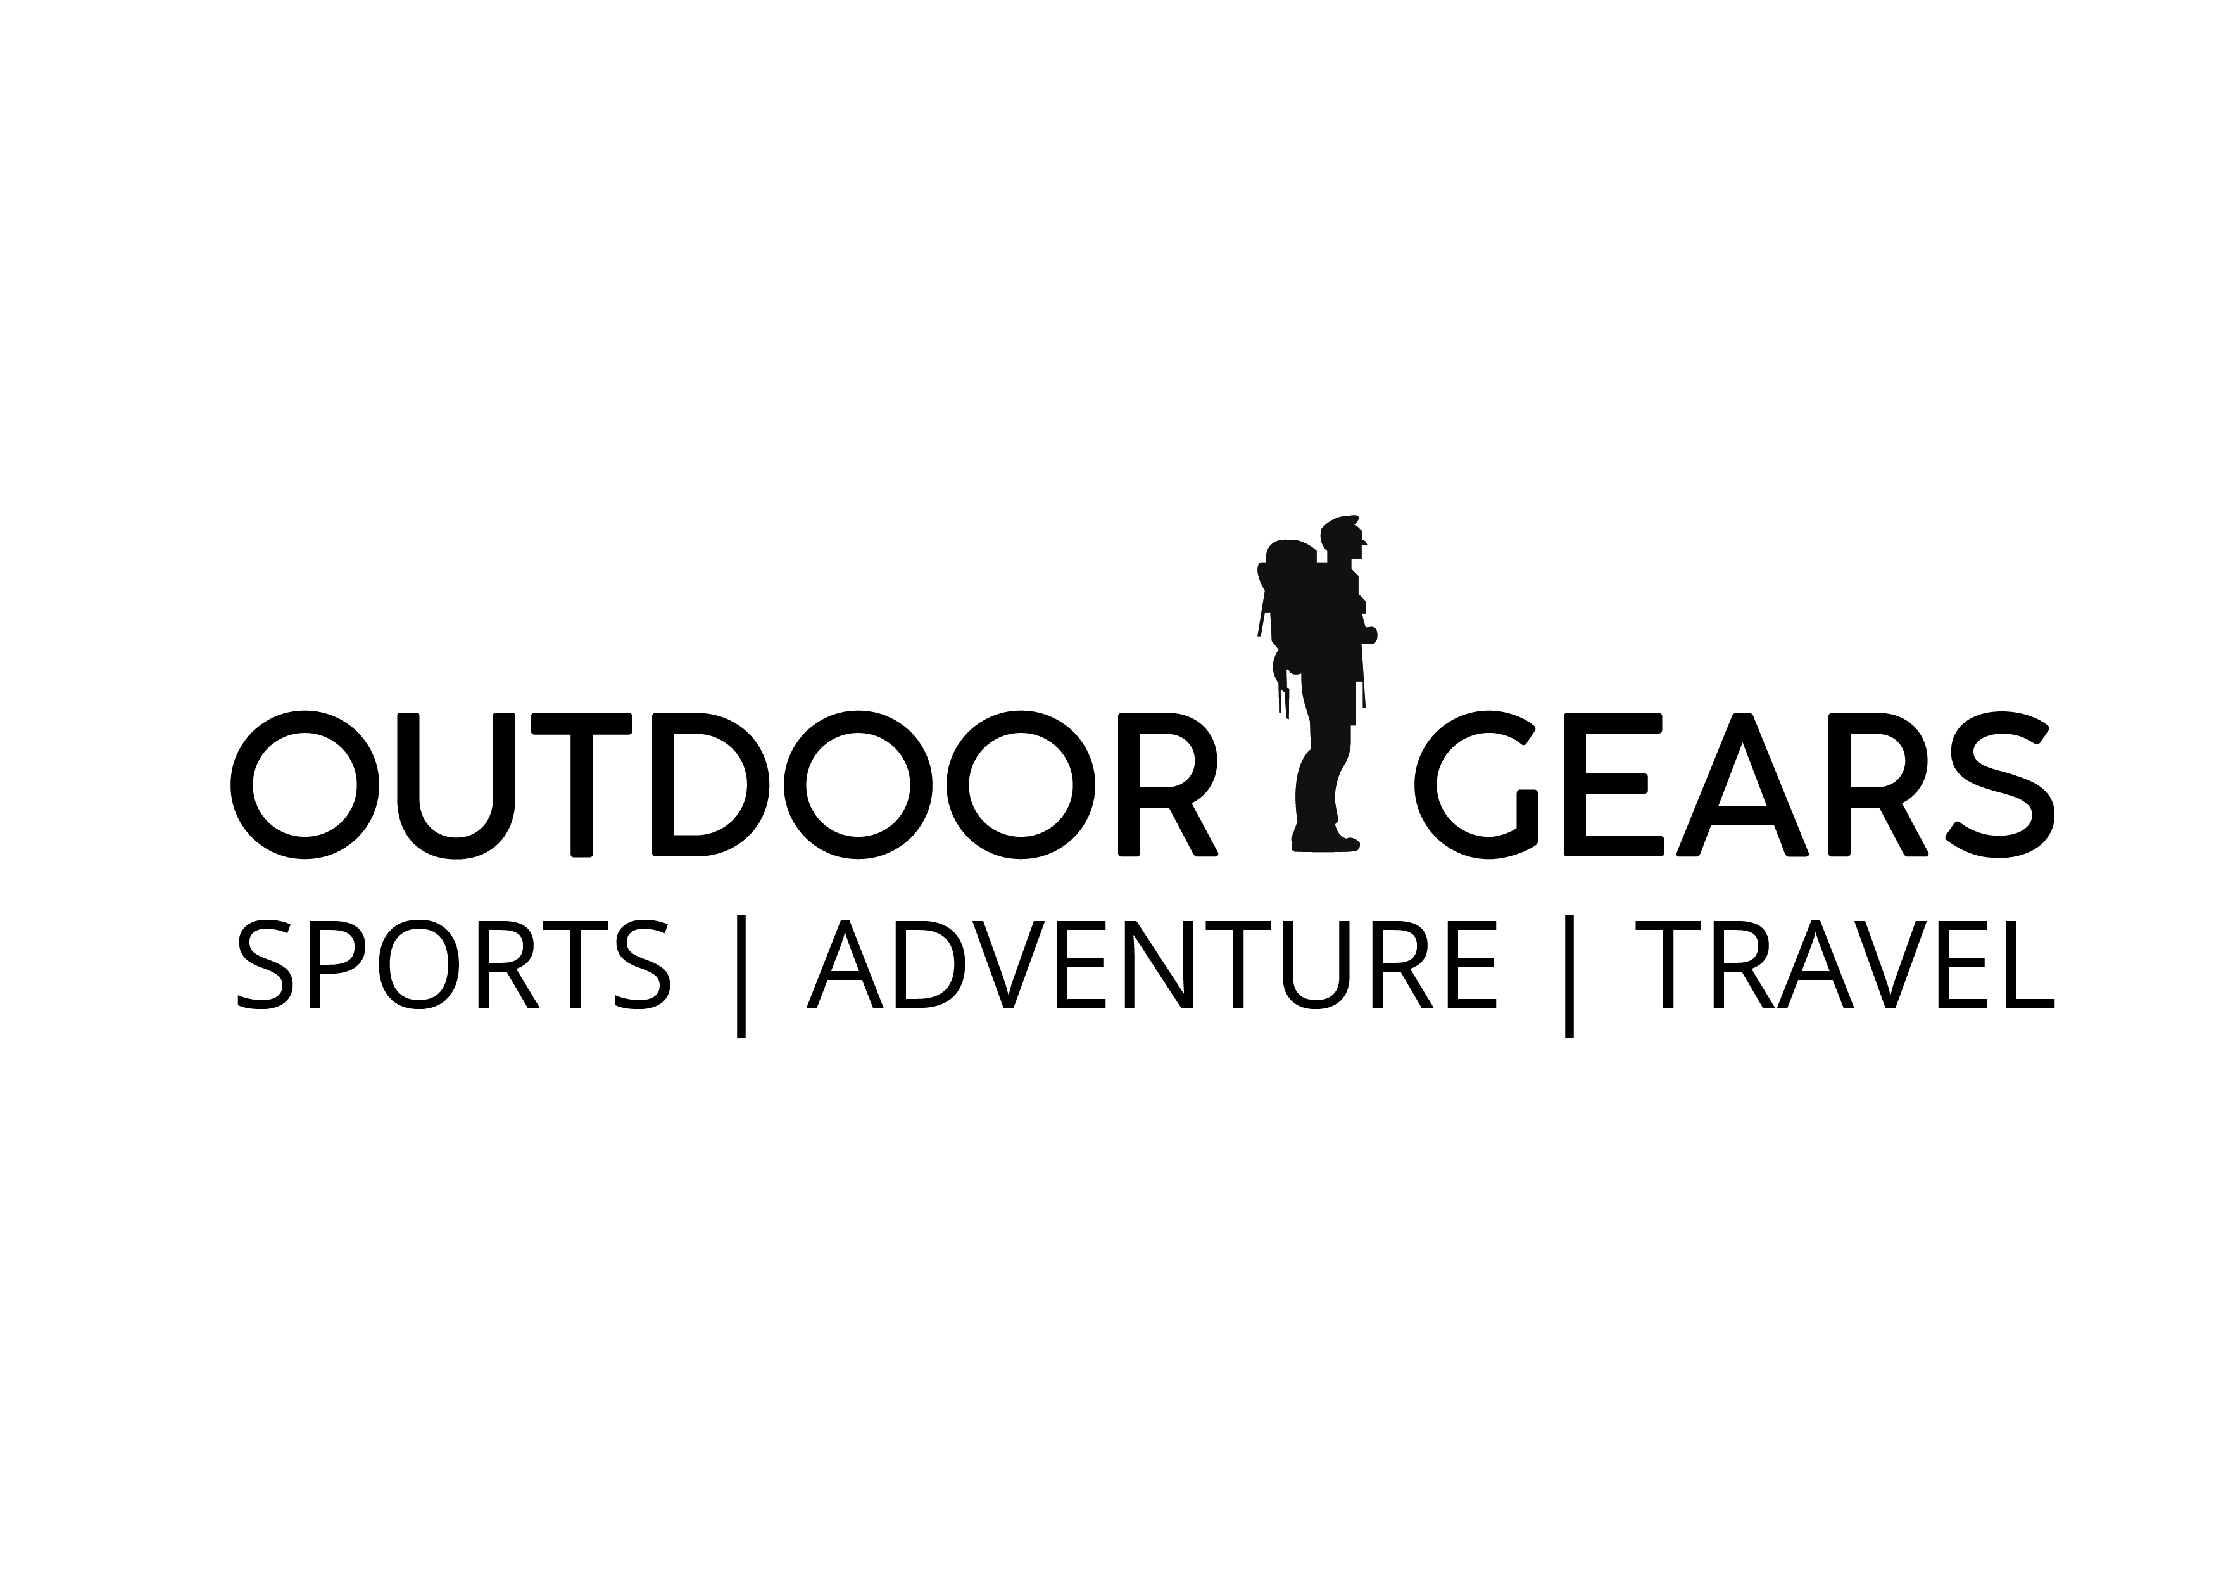 Family Outdoor Camping Trading